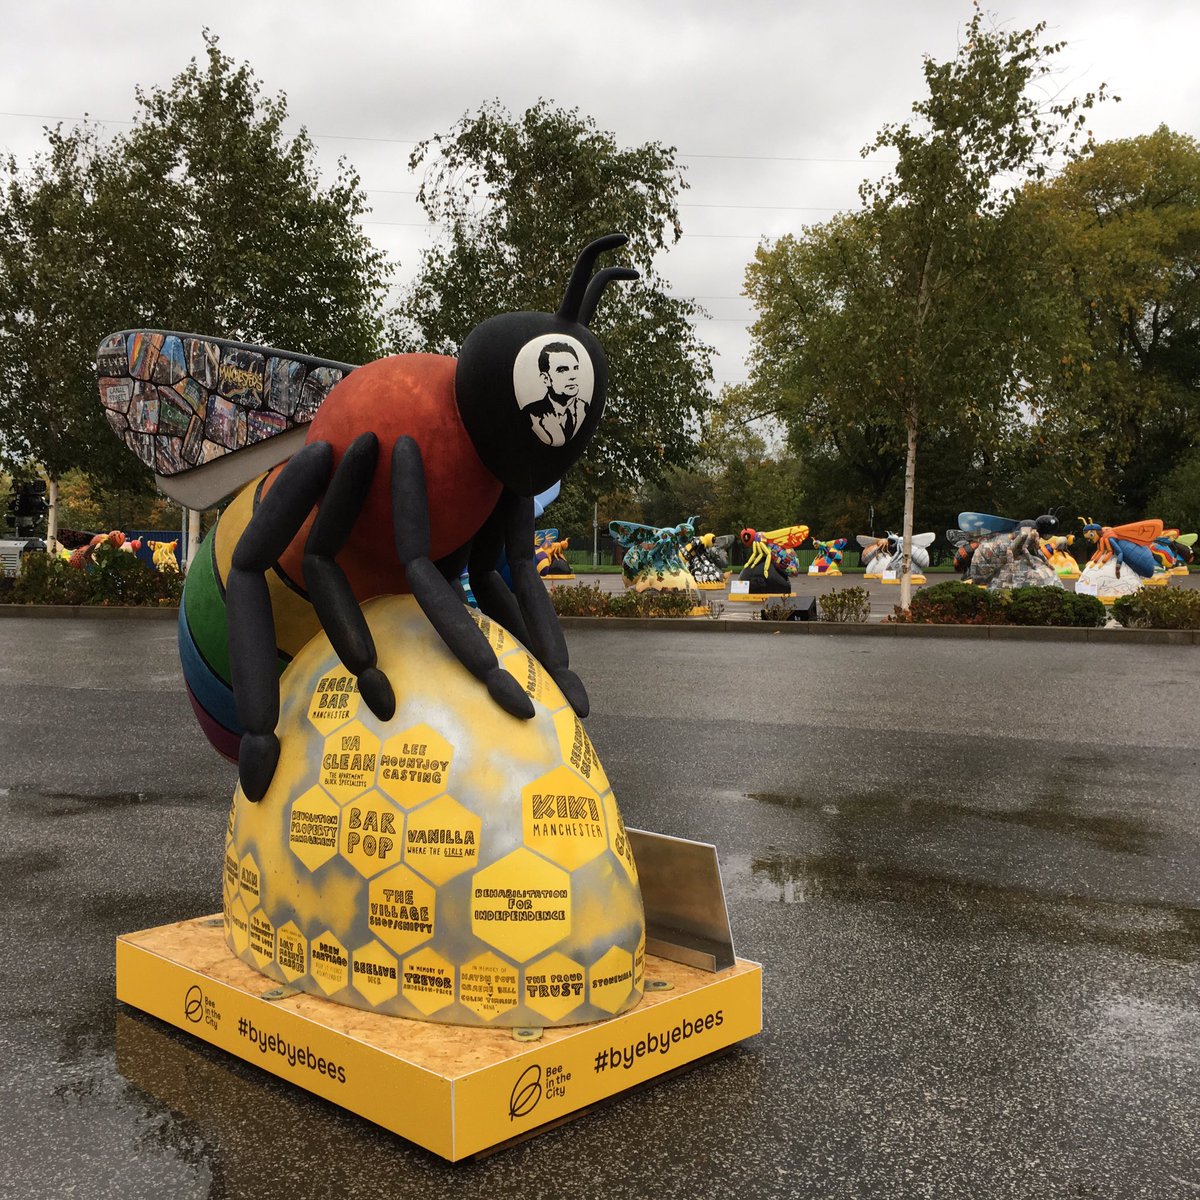 🐝 rilliant to see the #LGBTQ #QueenBee it the #BeeInTheCity #byebyebee event at #manchester velodrome. #mcrbeequest books on sale along with other #manchesterArtists